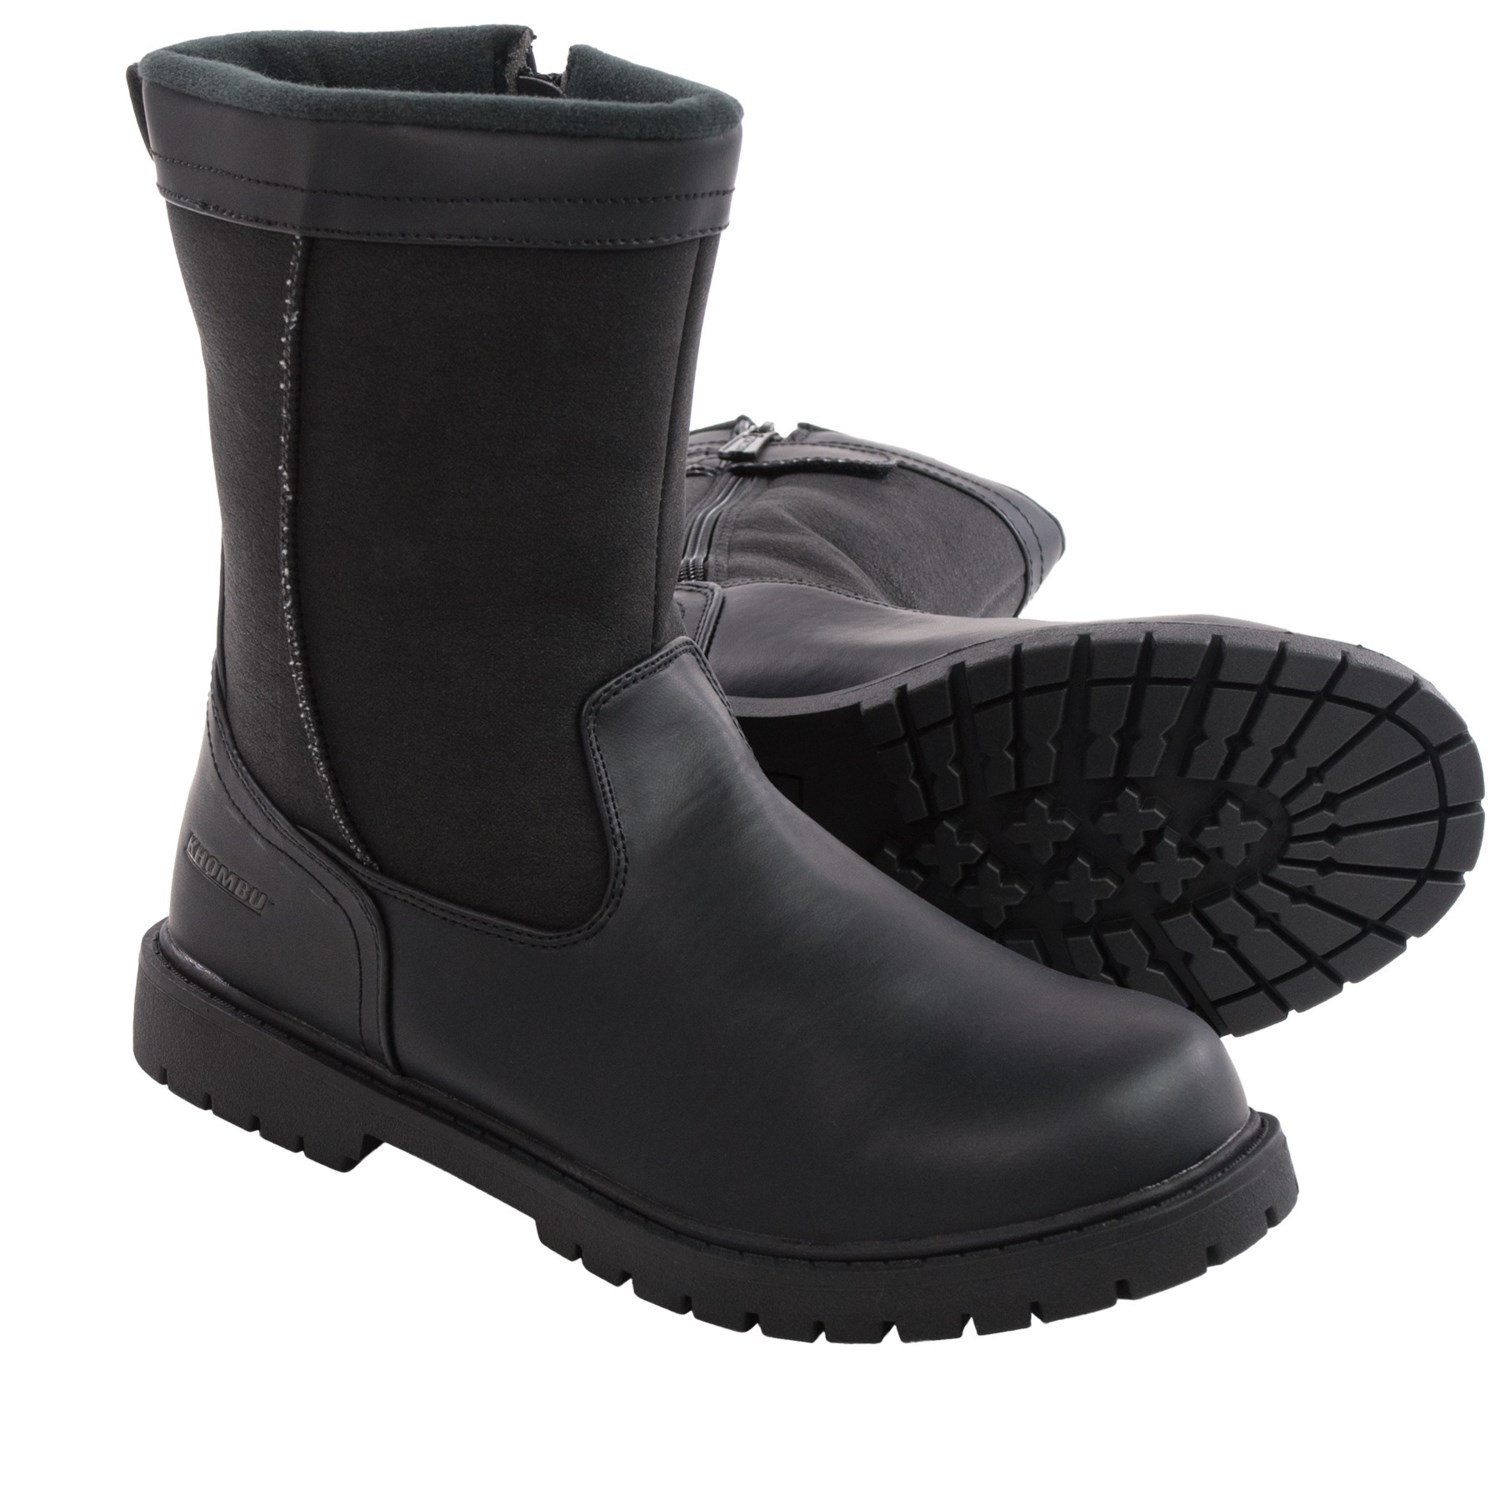 Khombu Canaan Snow Boots (For Men) - Save 64%